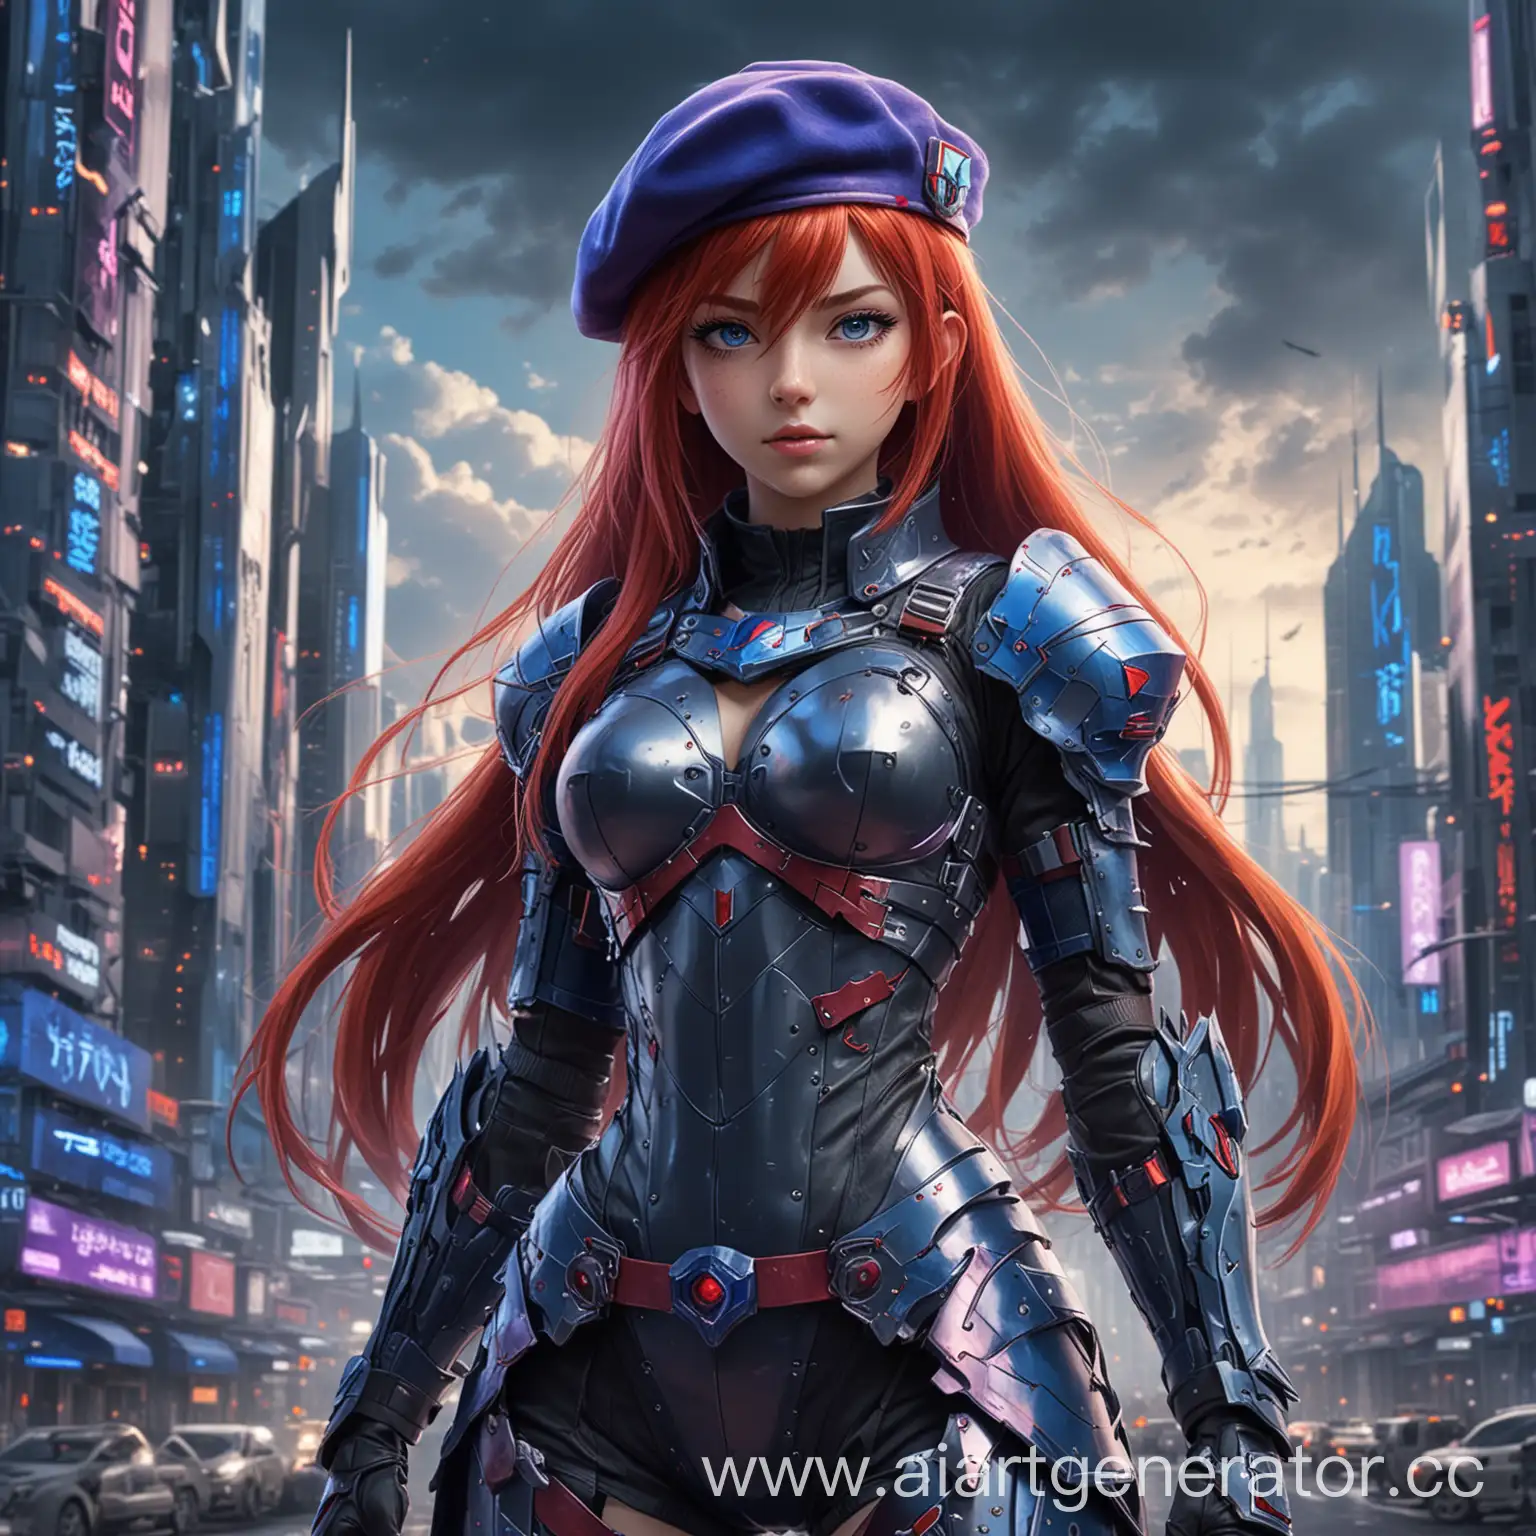 Anime girl in full armor, without helmet, with red hair, long hair, violet eyes, blue aiguillette, beret, full height, against the background of a futuristic city